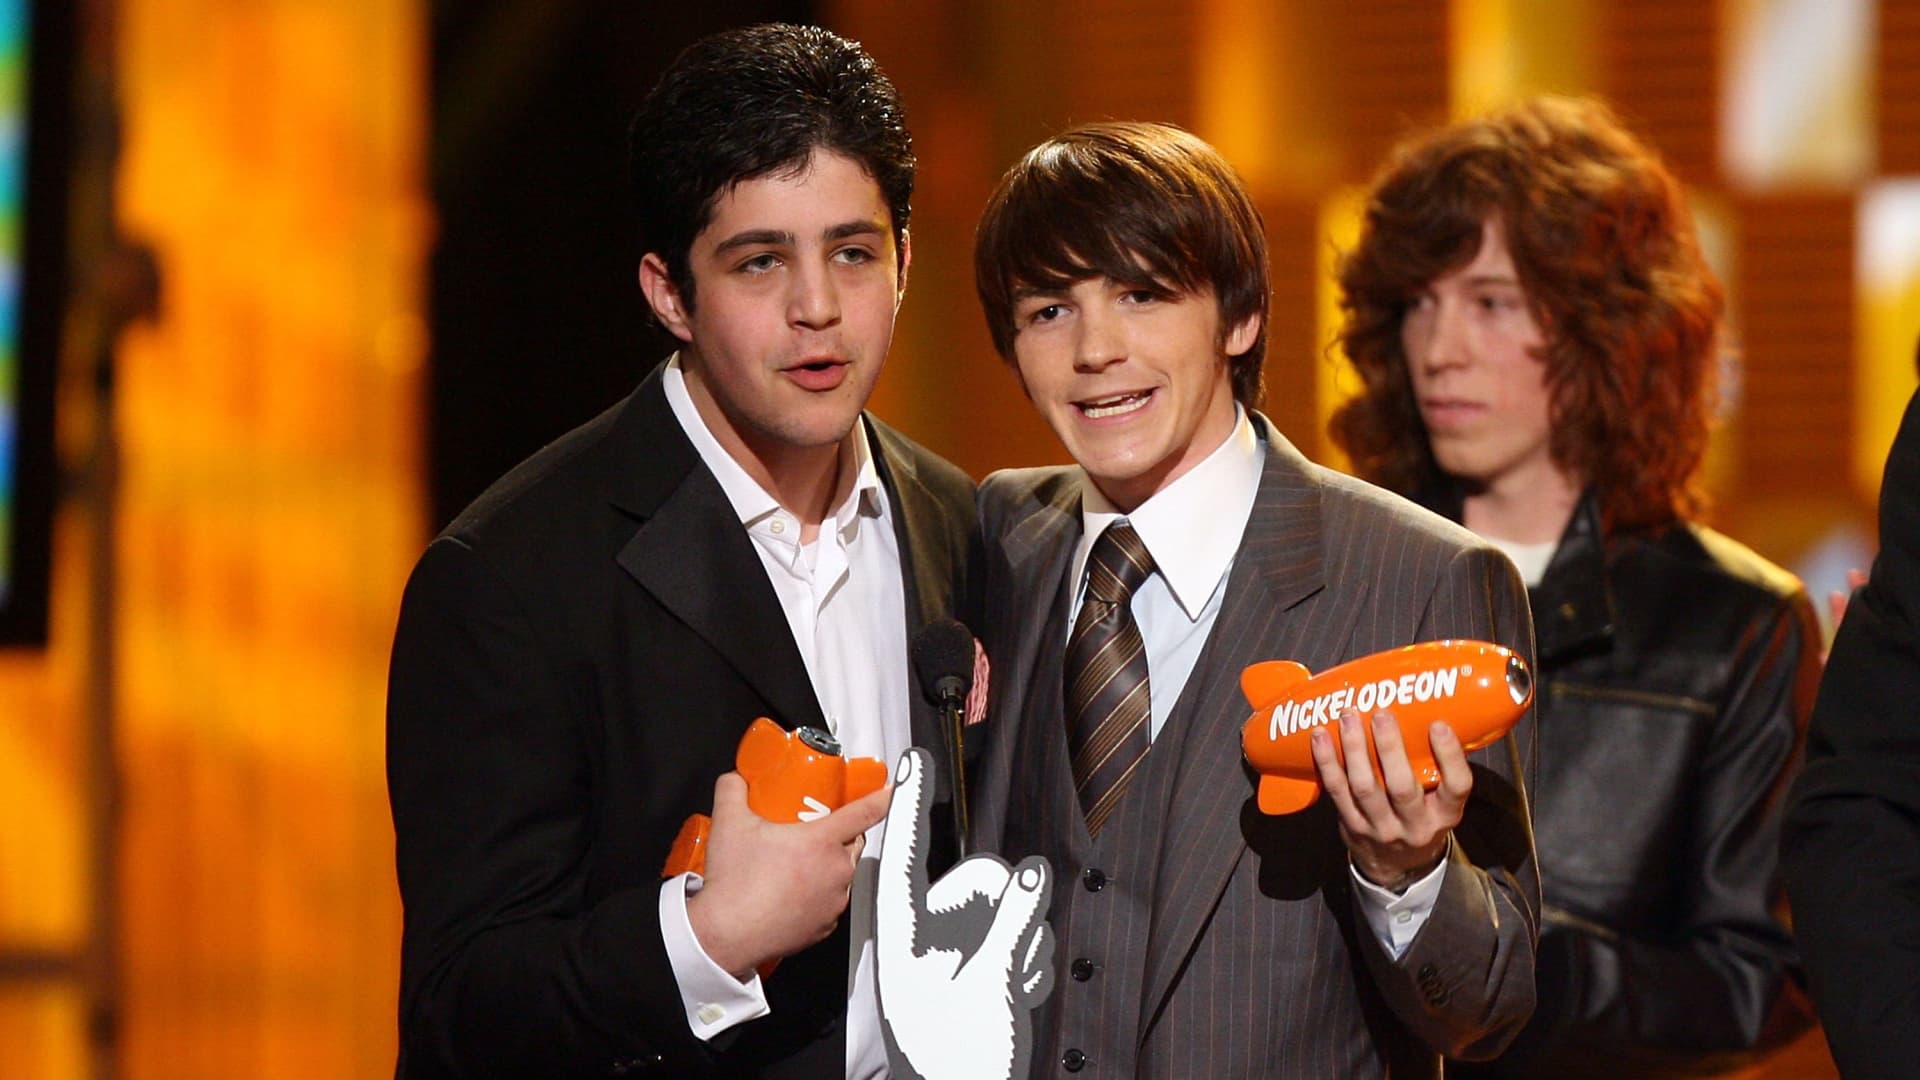 Drake and Josh Peck accept their award for Favorite TV Show from Snowboarder Shaun White onstage at the 19th Annual Kid's Choice Awards held at UCLA's Pauley Pavilion on April 1, 2006 in Westwood, California.